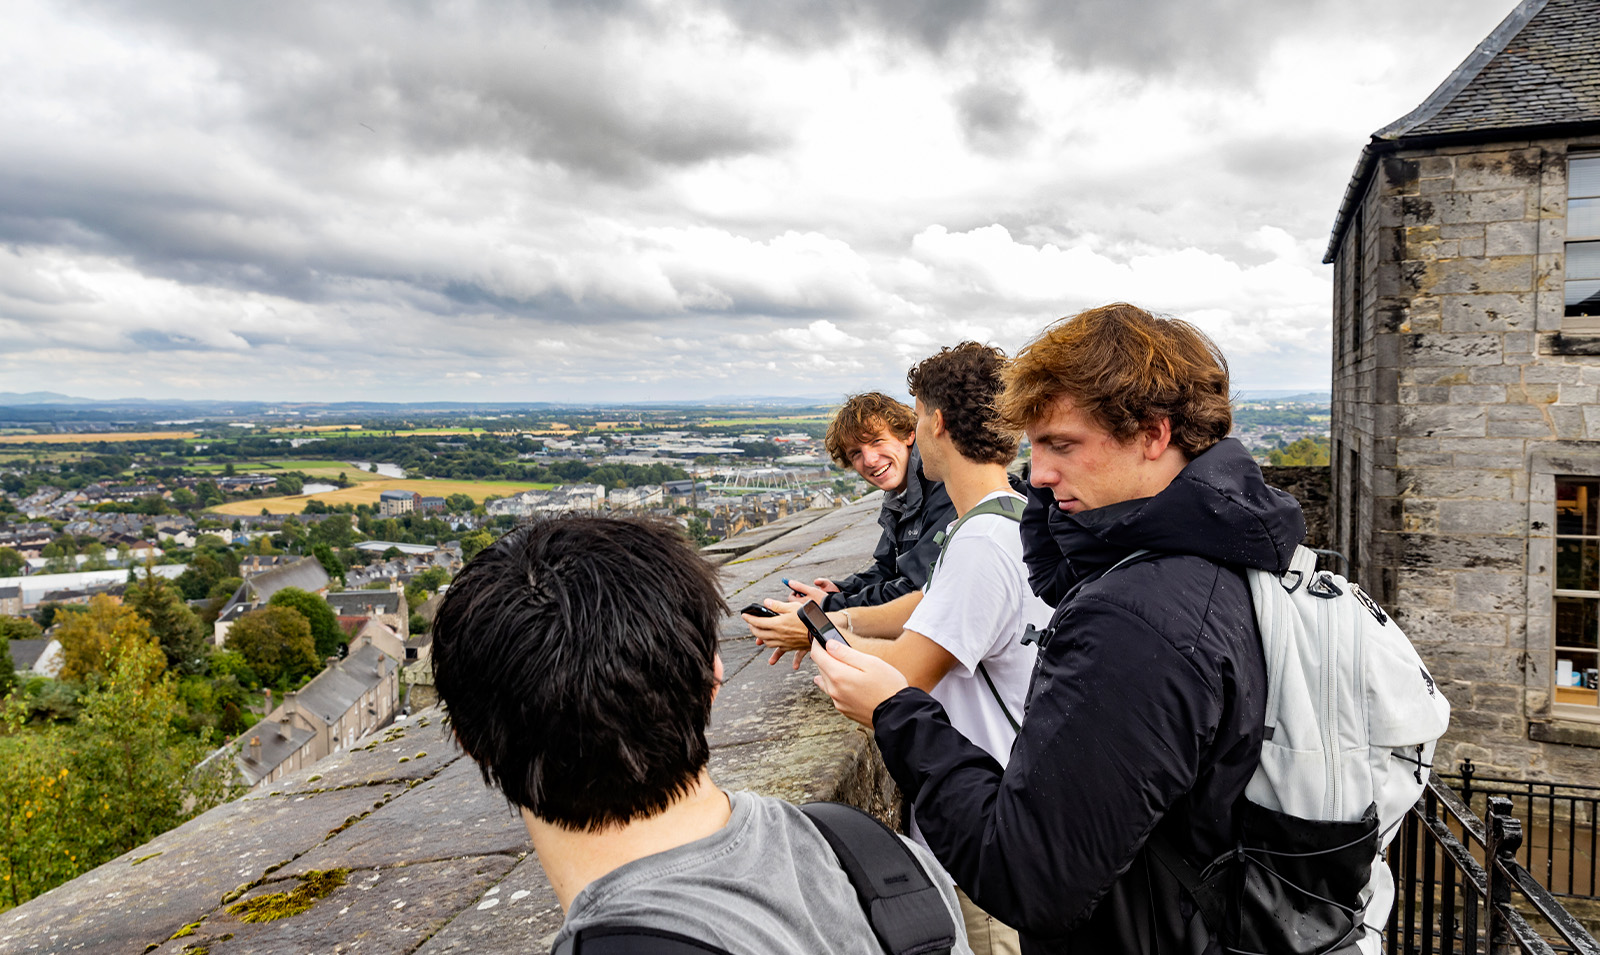 Students standing up against a wall at a high elevation and looking out at the cityscape below in Stirling, Scotland.